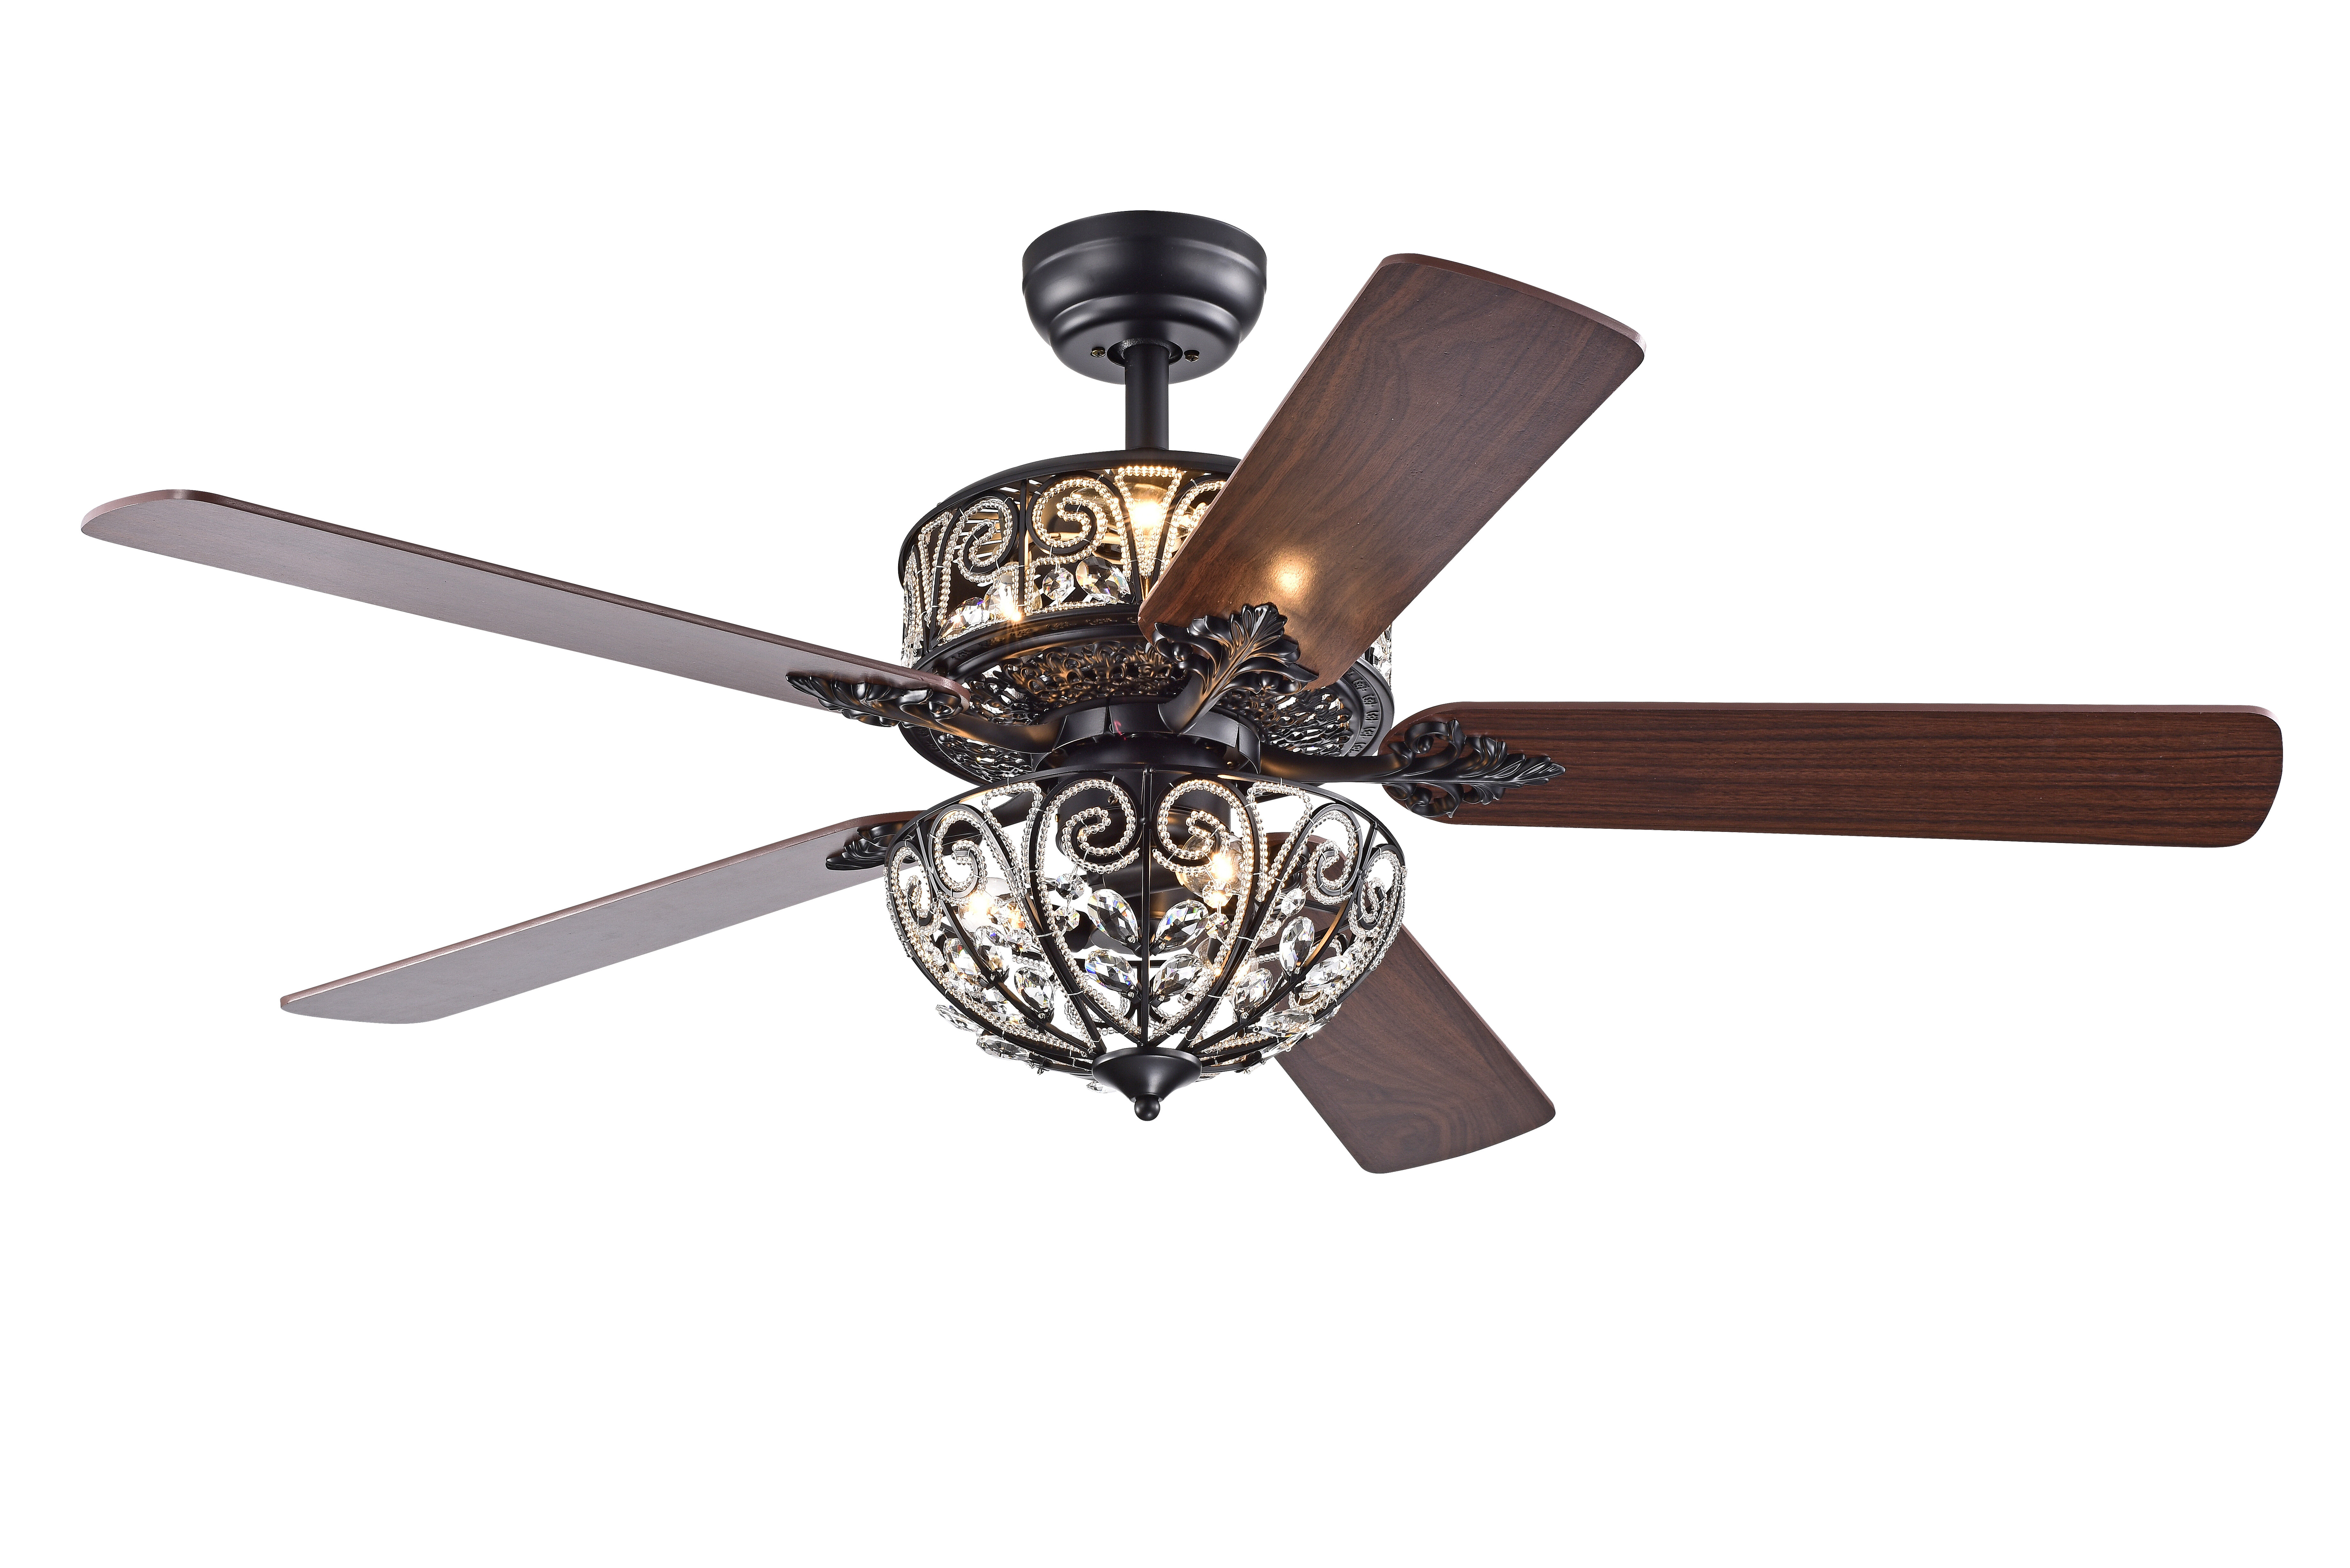 August Grove 52 Veazey 5 Blade Standard Ceiling Fan With Light Kit Included Reviews Wayfair